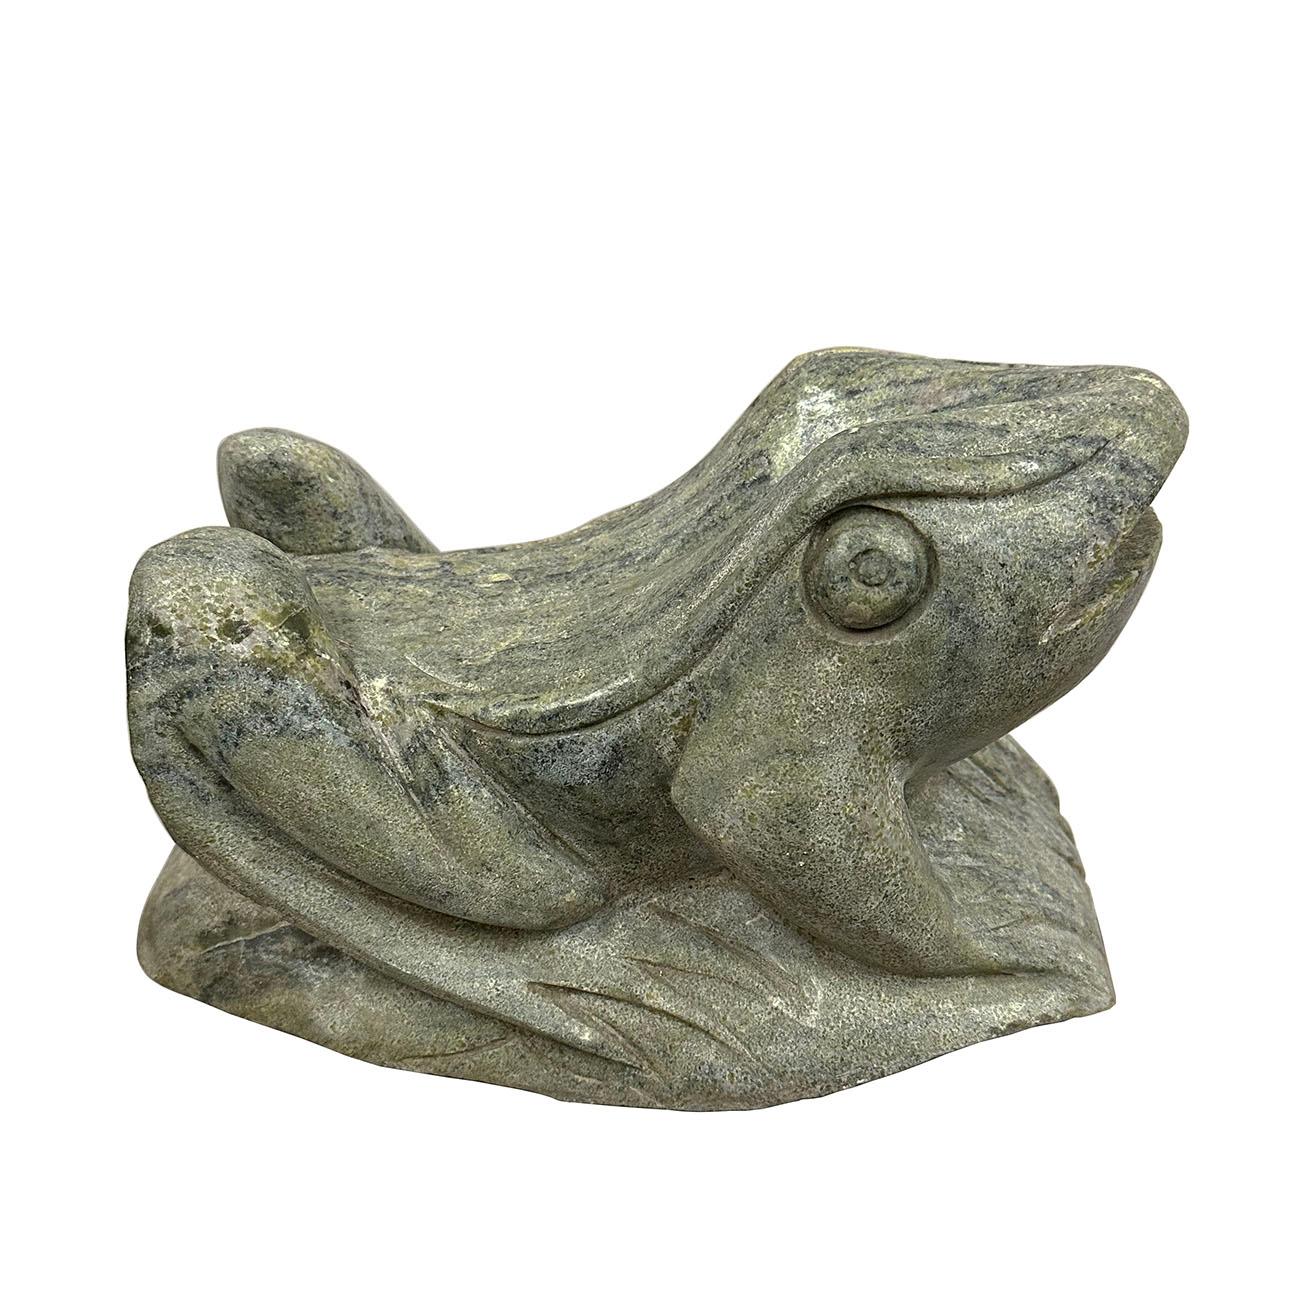 Carved Mid-20th Century Vintage Chinese Hand Crafted Stone Frog